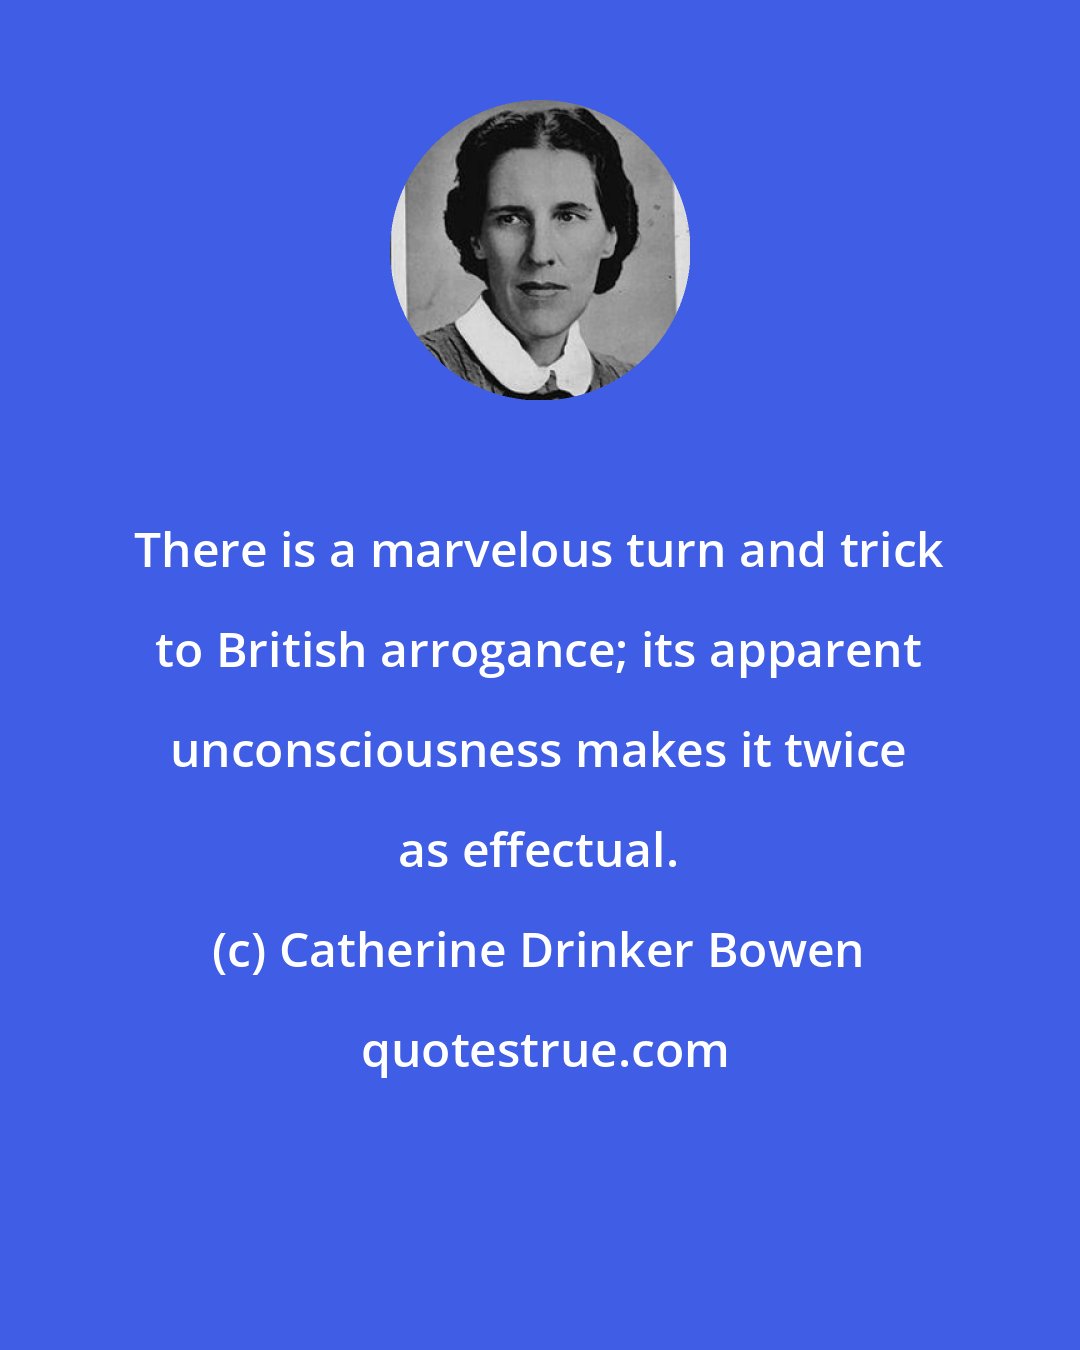 Catherine Drinker Bowen: There is a marvelous turn and trick to British arrogance; its apparent unconsciousness makes it twice as effectual.